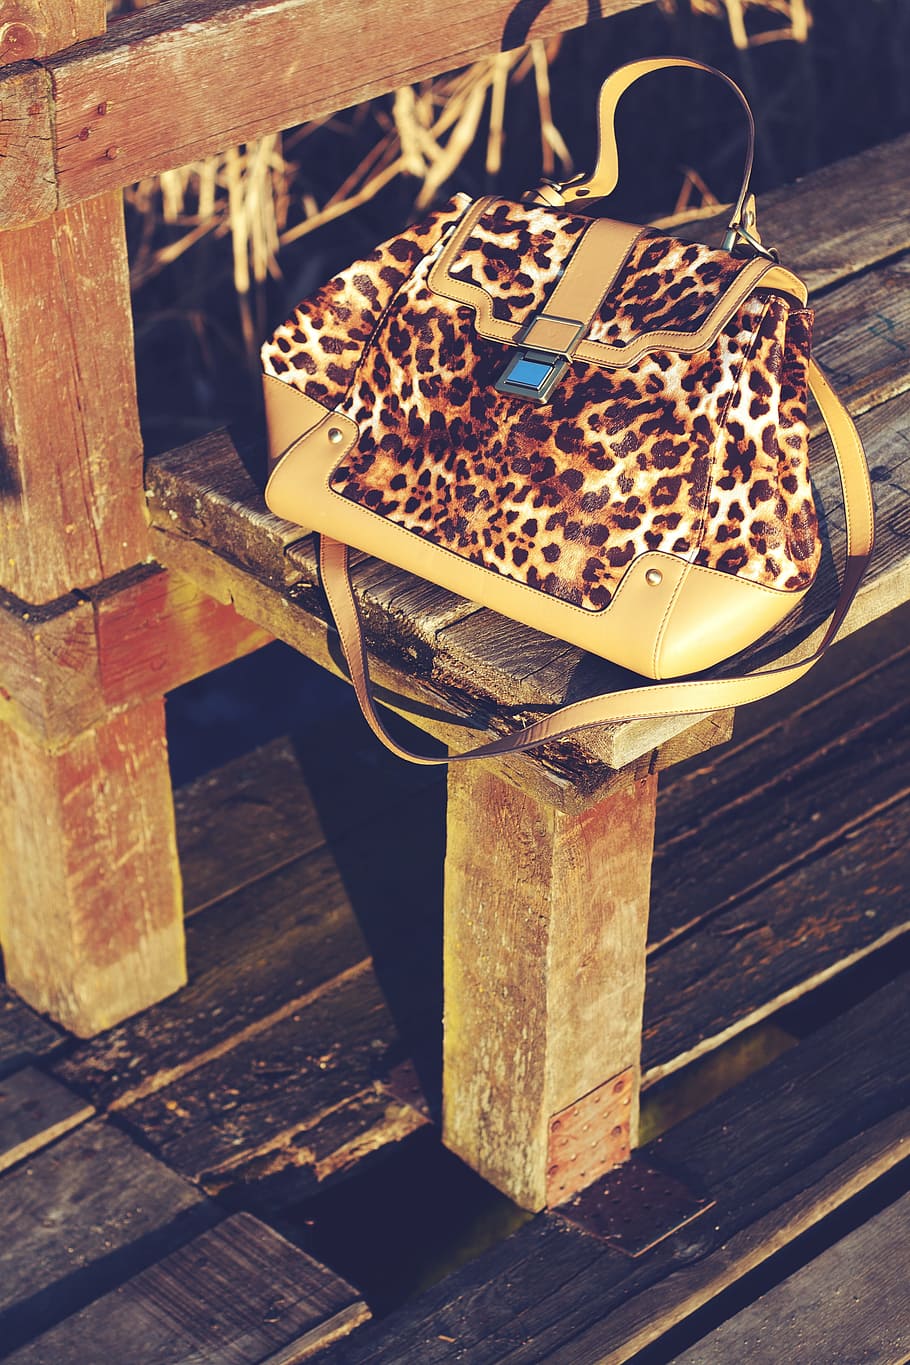 Beige, Leopard, Print, Bag, leopard, print, old-fashioned, old, wood - Material, retro Styled, no People